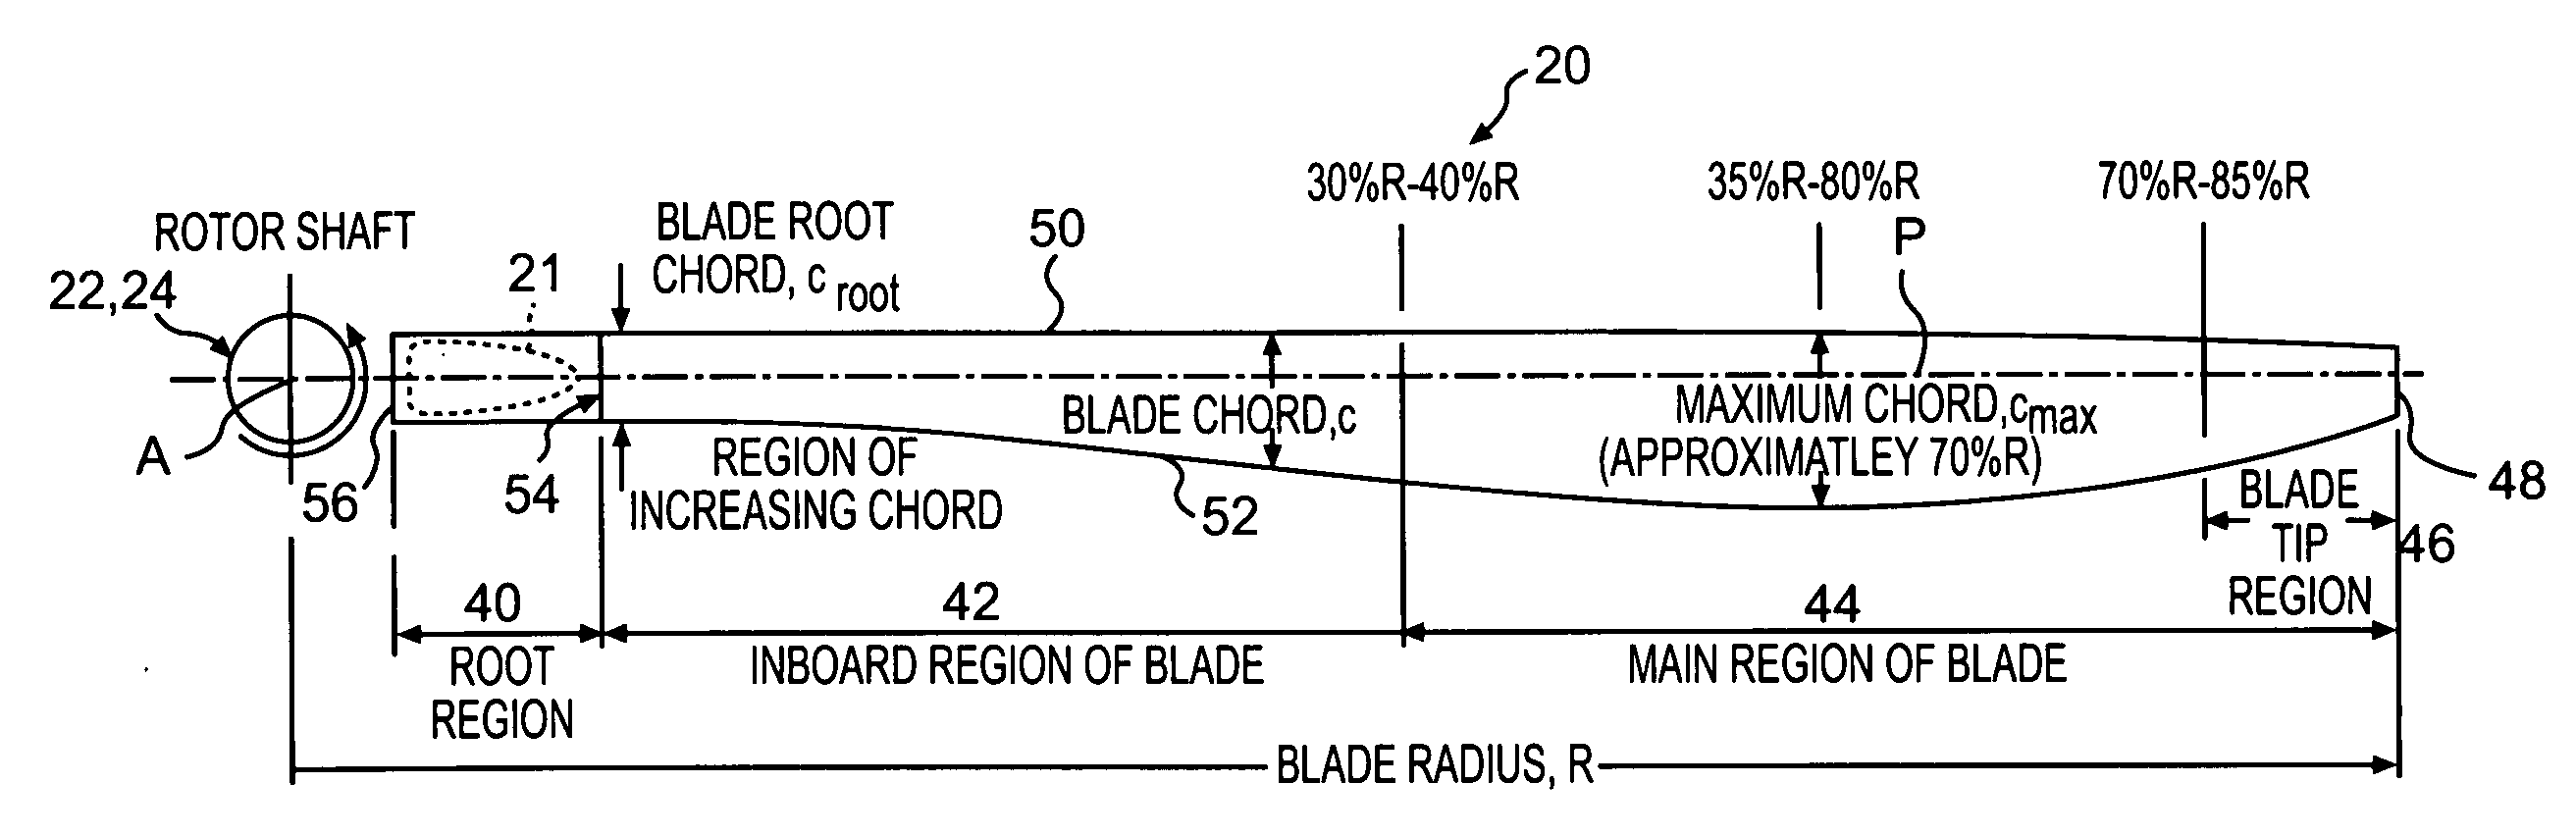 Rotor blade for a high speed rotary-wing aircraft